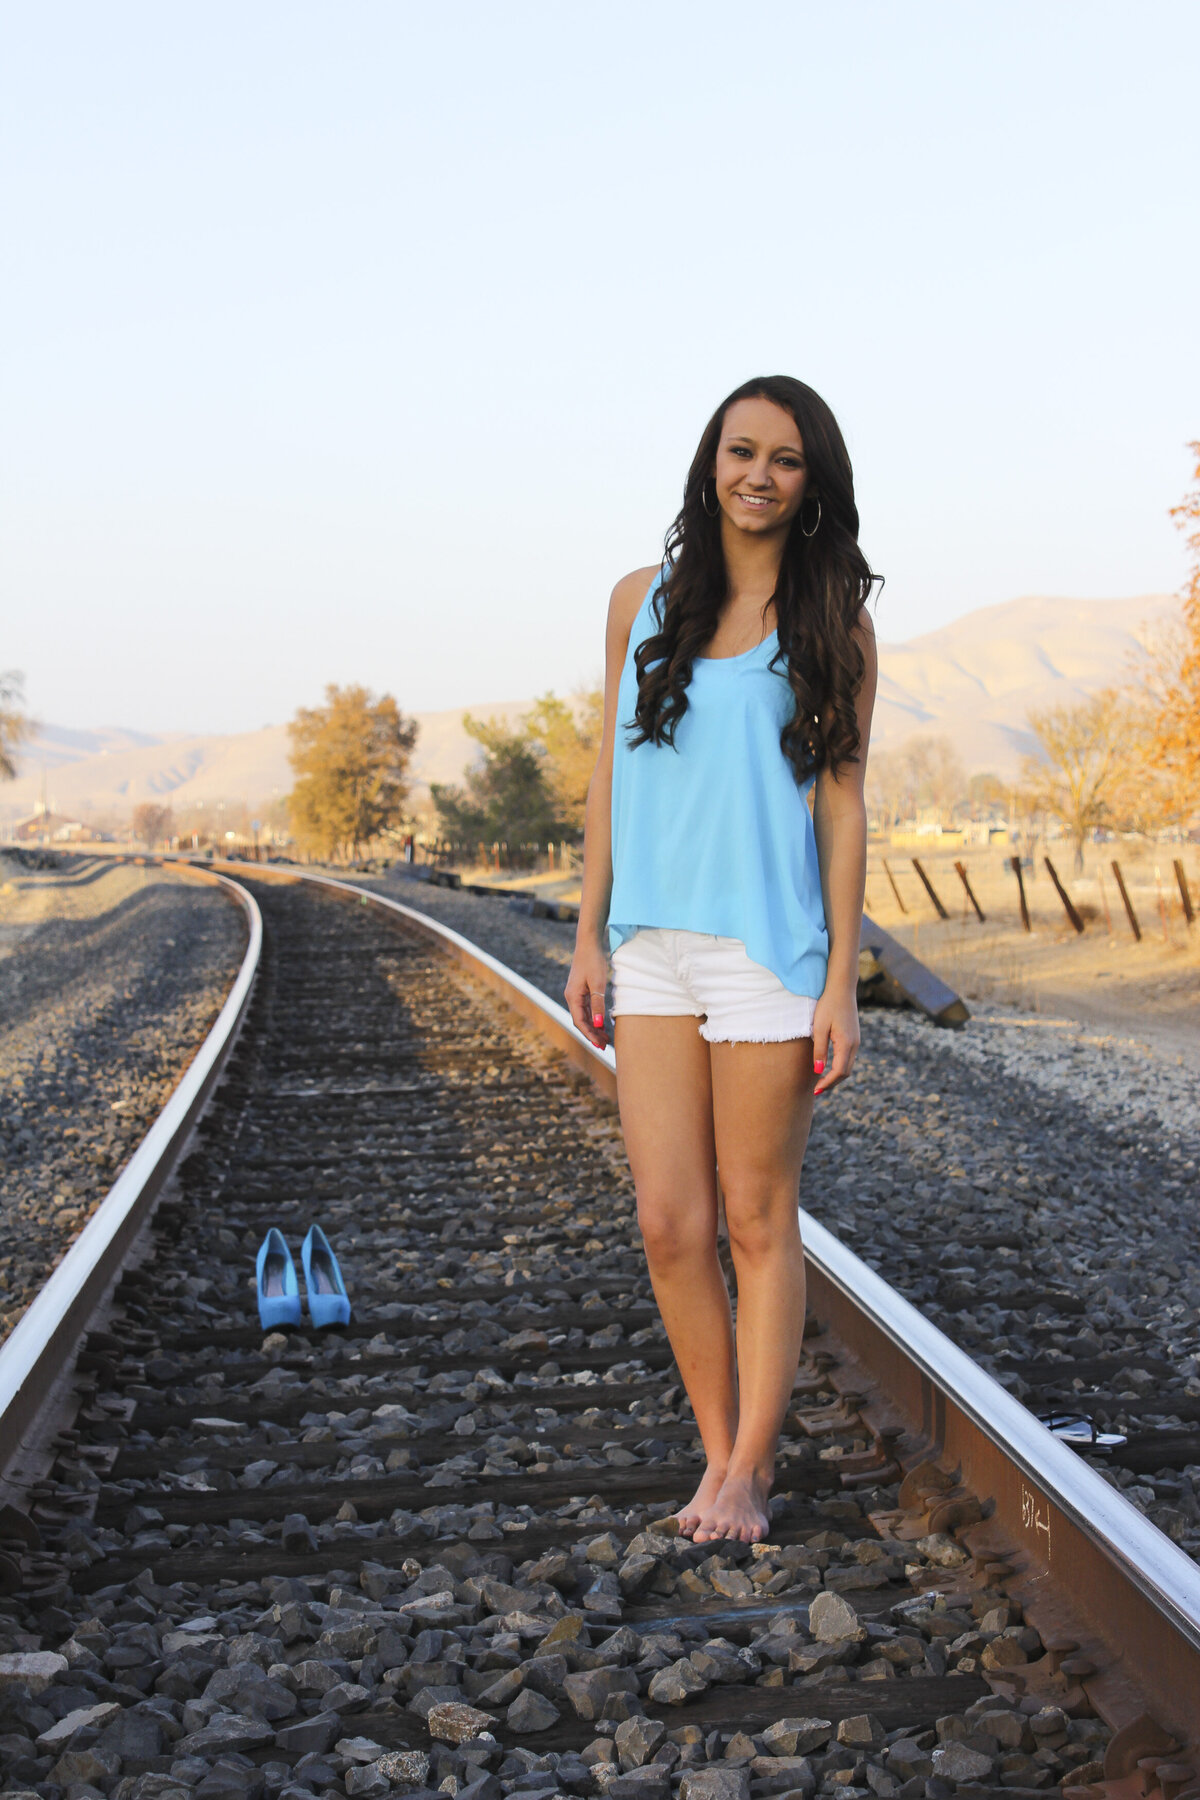 Lady on Railroad tracks  with glowing light of sunset beaming down golden light with blue high heal shoes in background